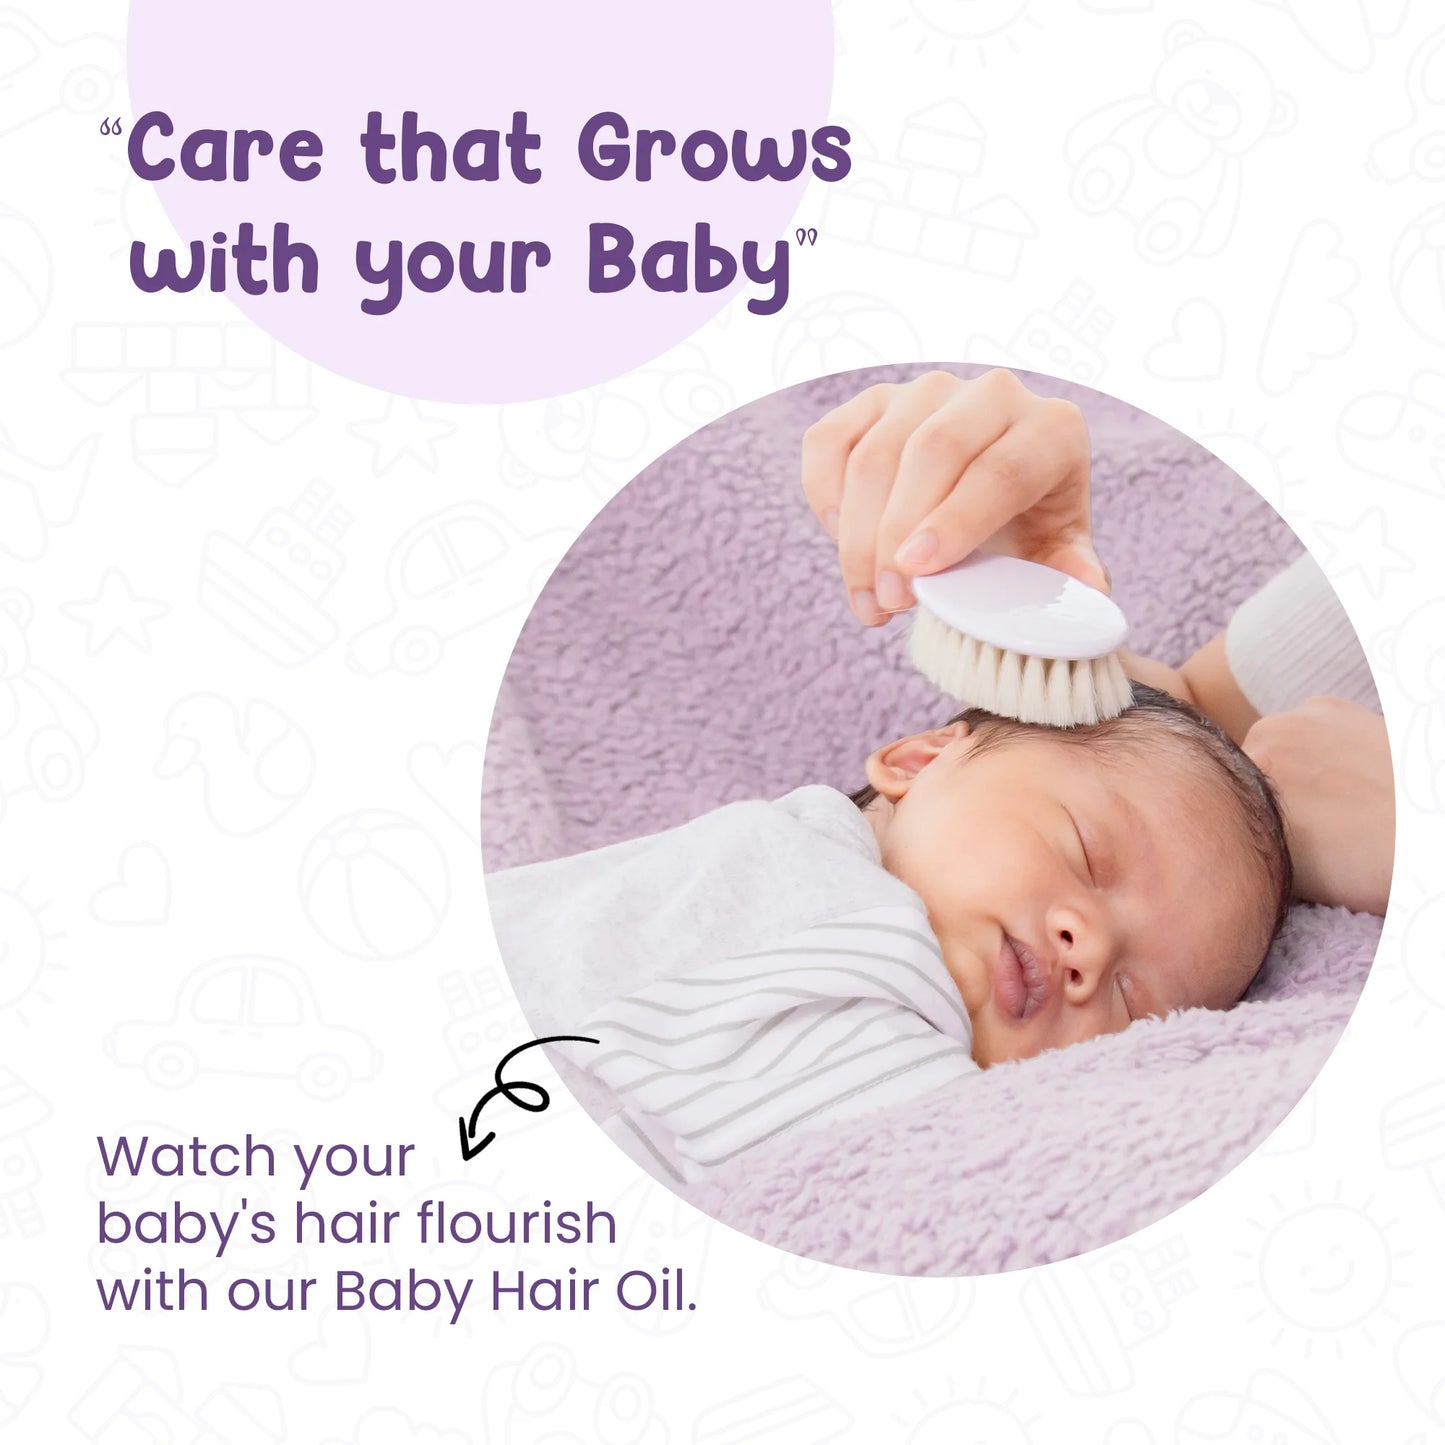 Baby with nourished and glossy hair after using nourishing hair oil